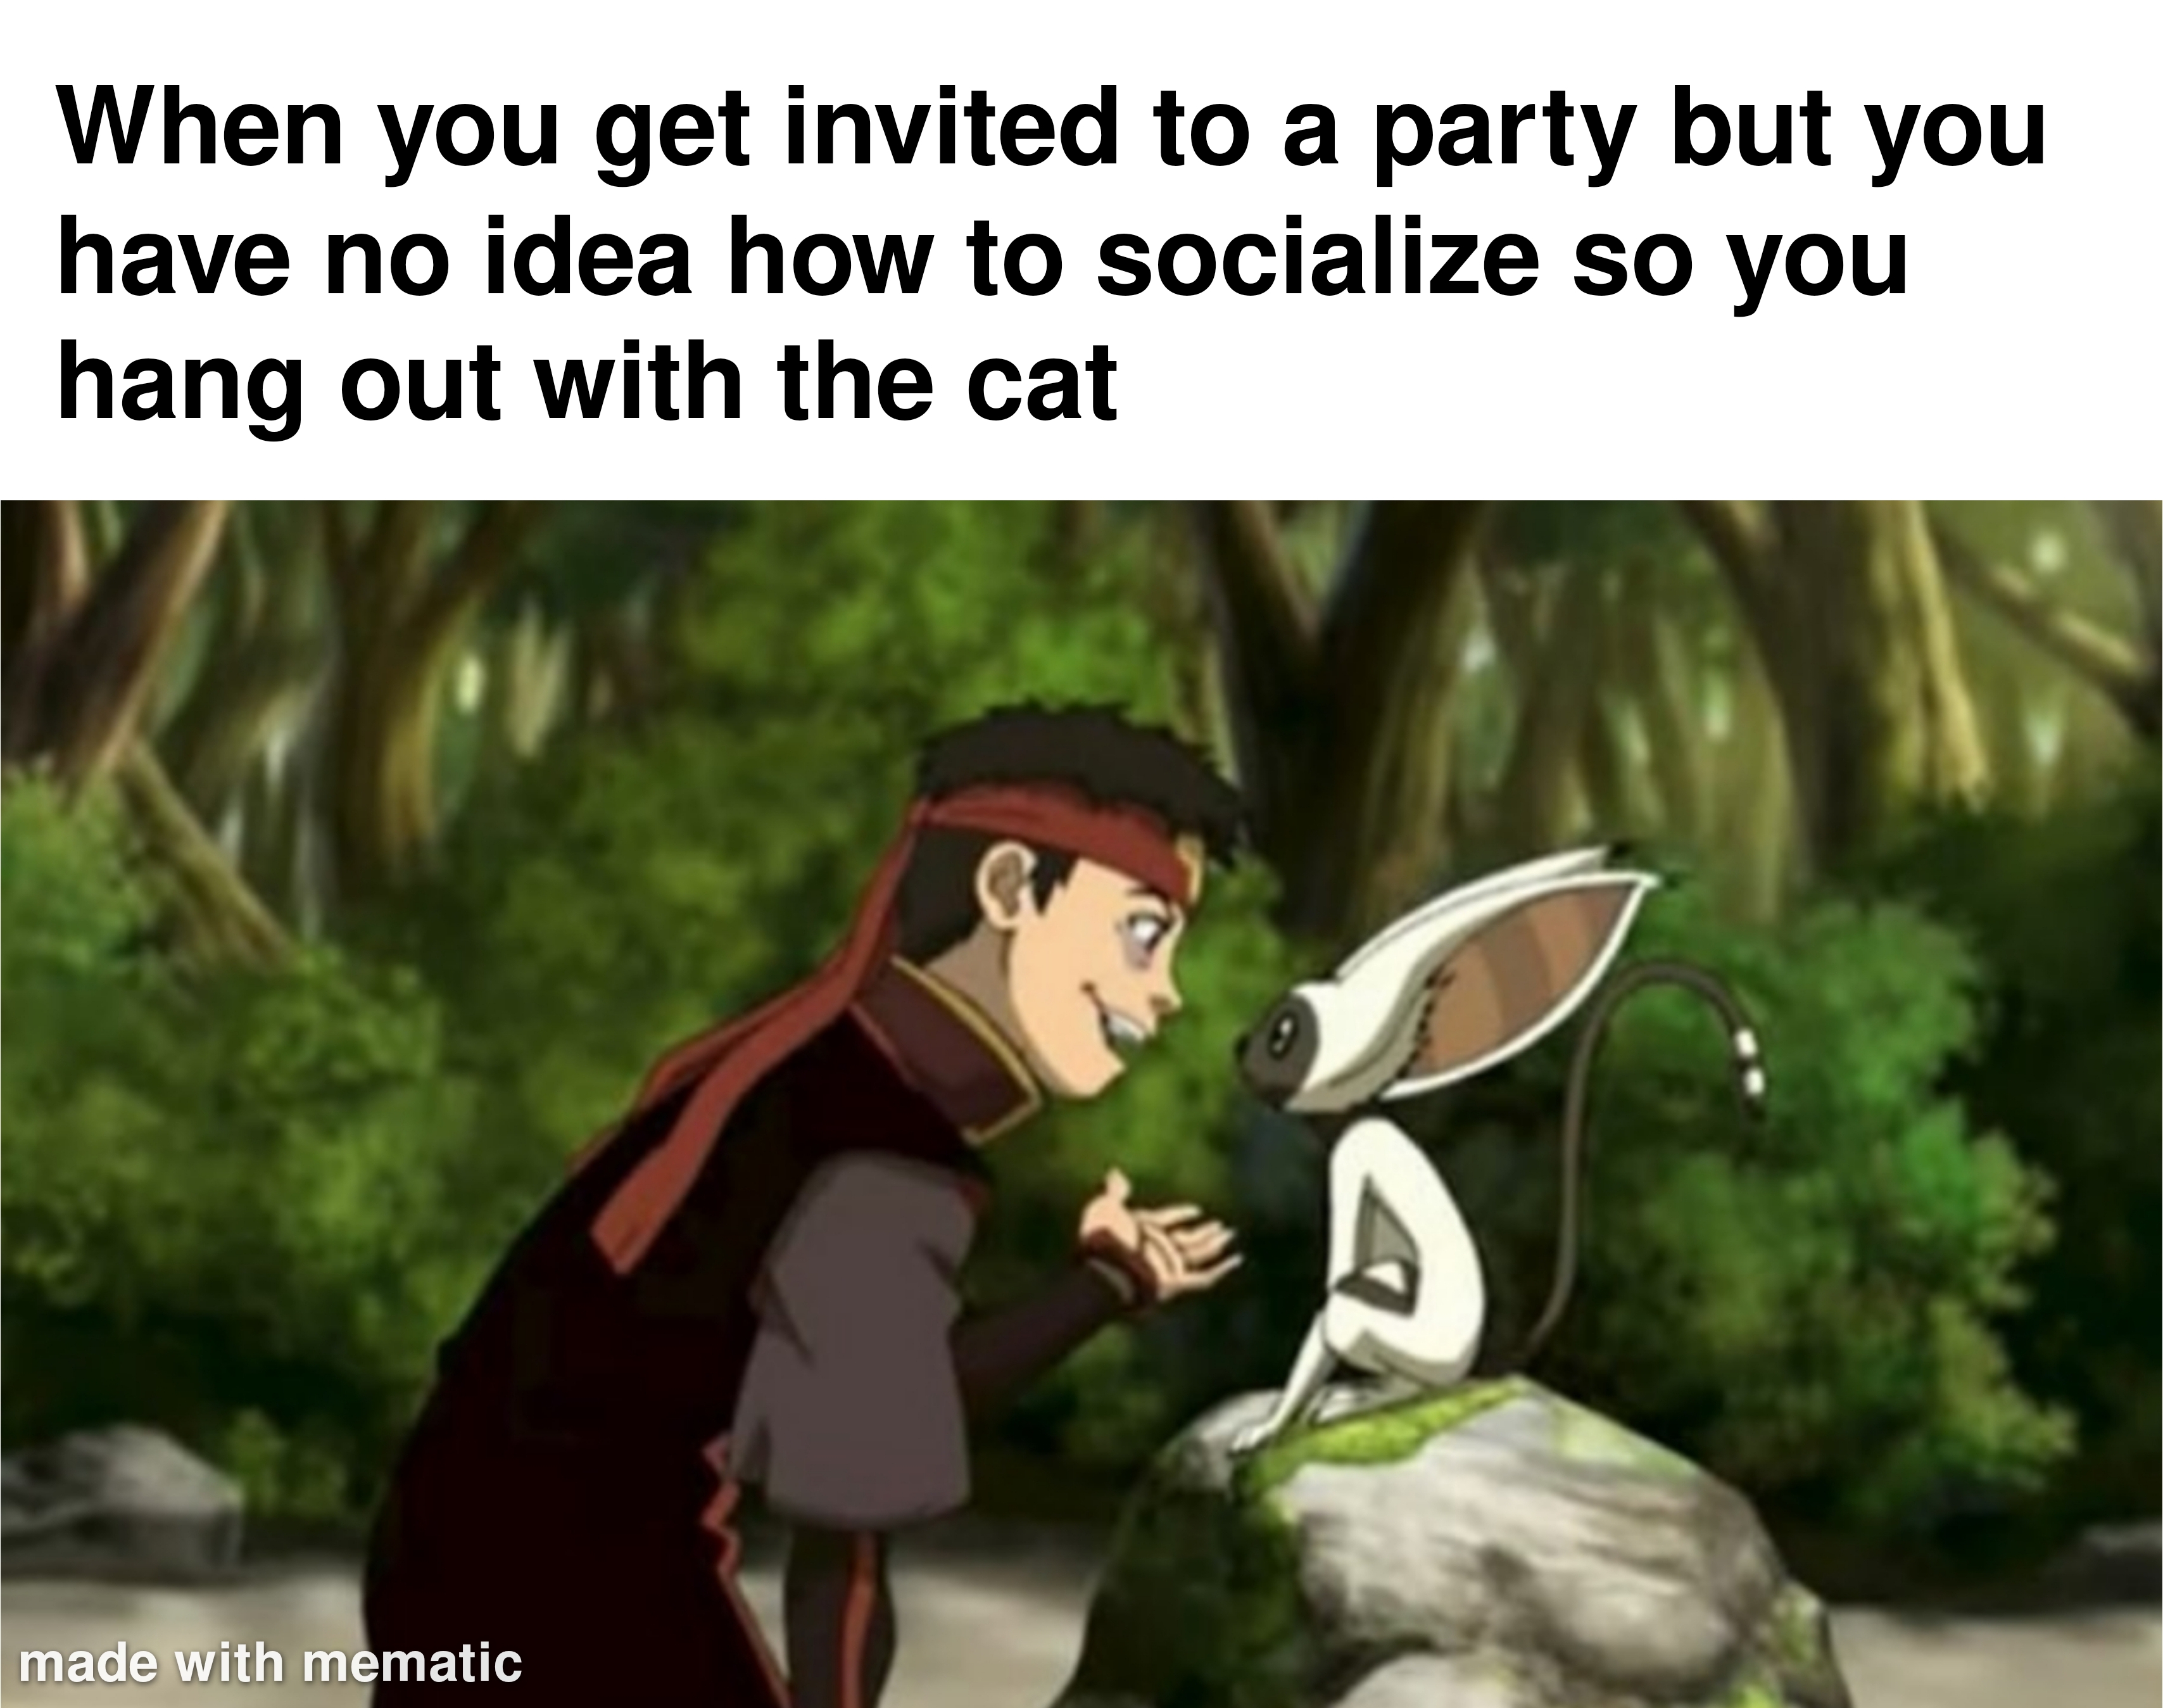 cartoon - When you get invited to a party but you have no idea how to socialize so you hang out with the cat made with mematic